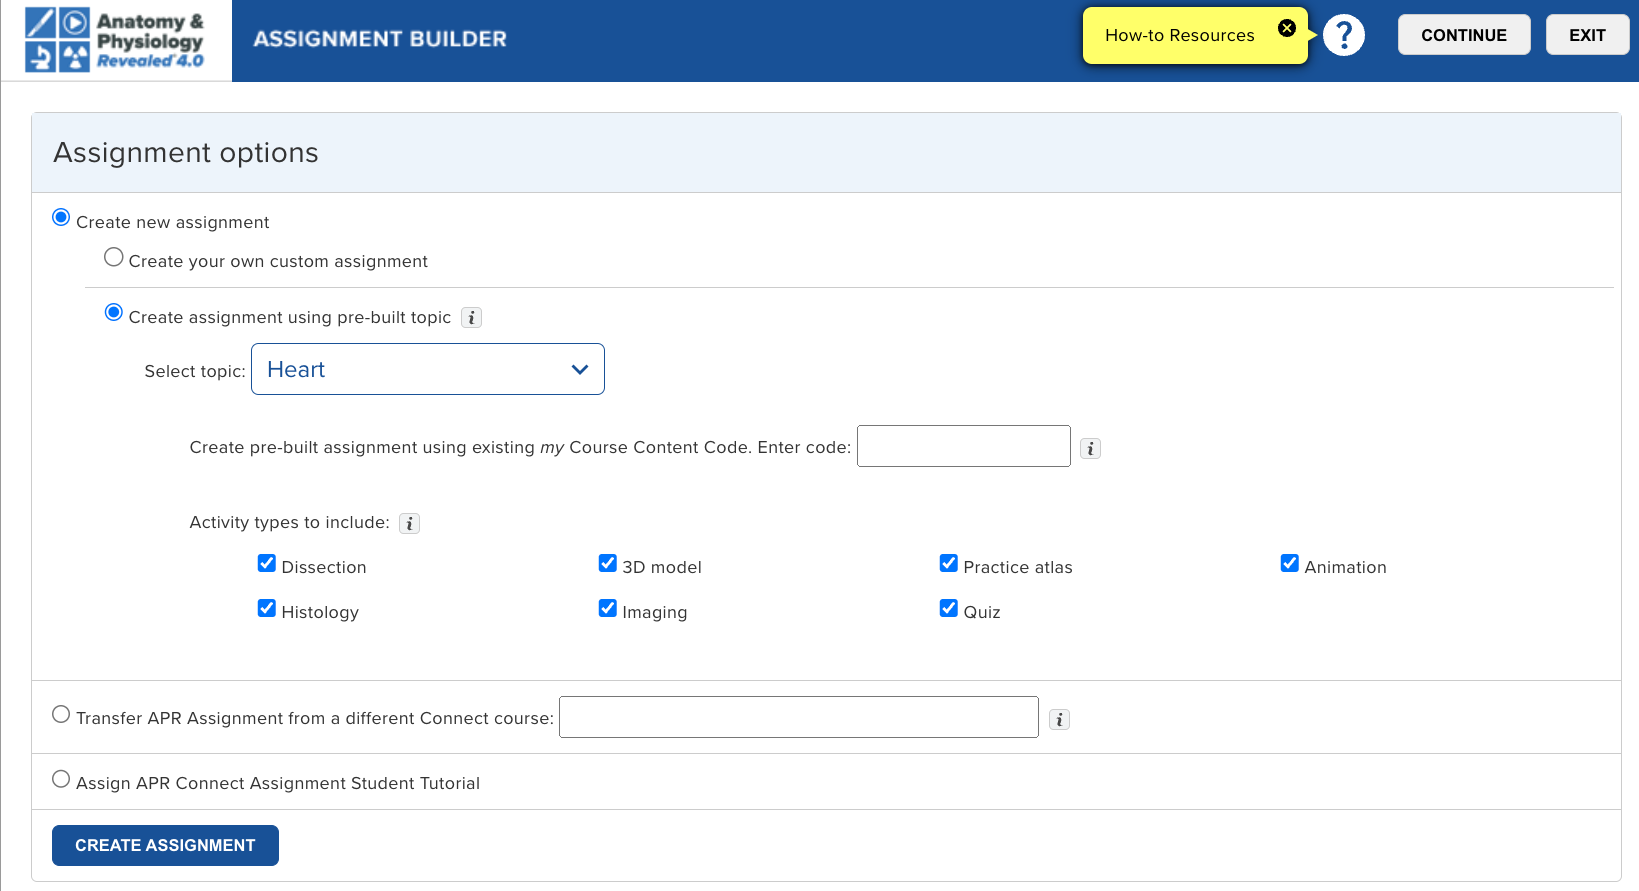 Assignment builder page for APR Connect Assignment shows the option of how a pre-built assignment can be created.